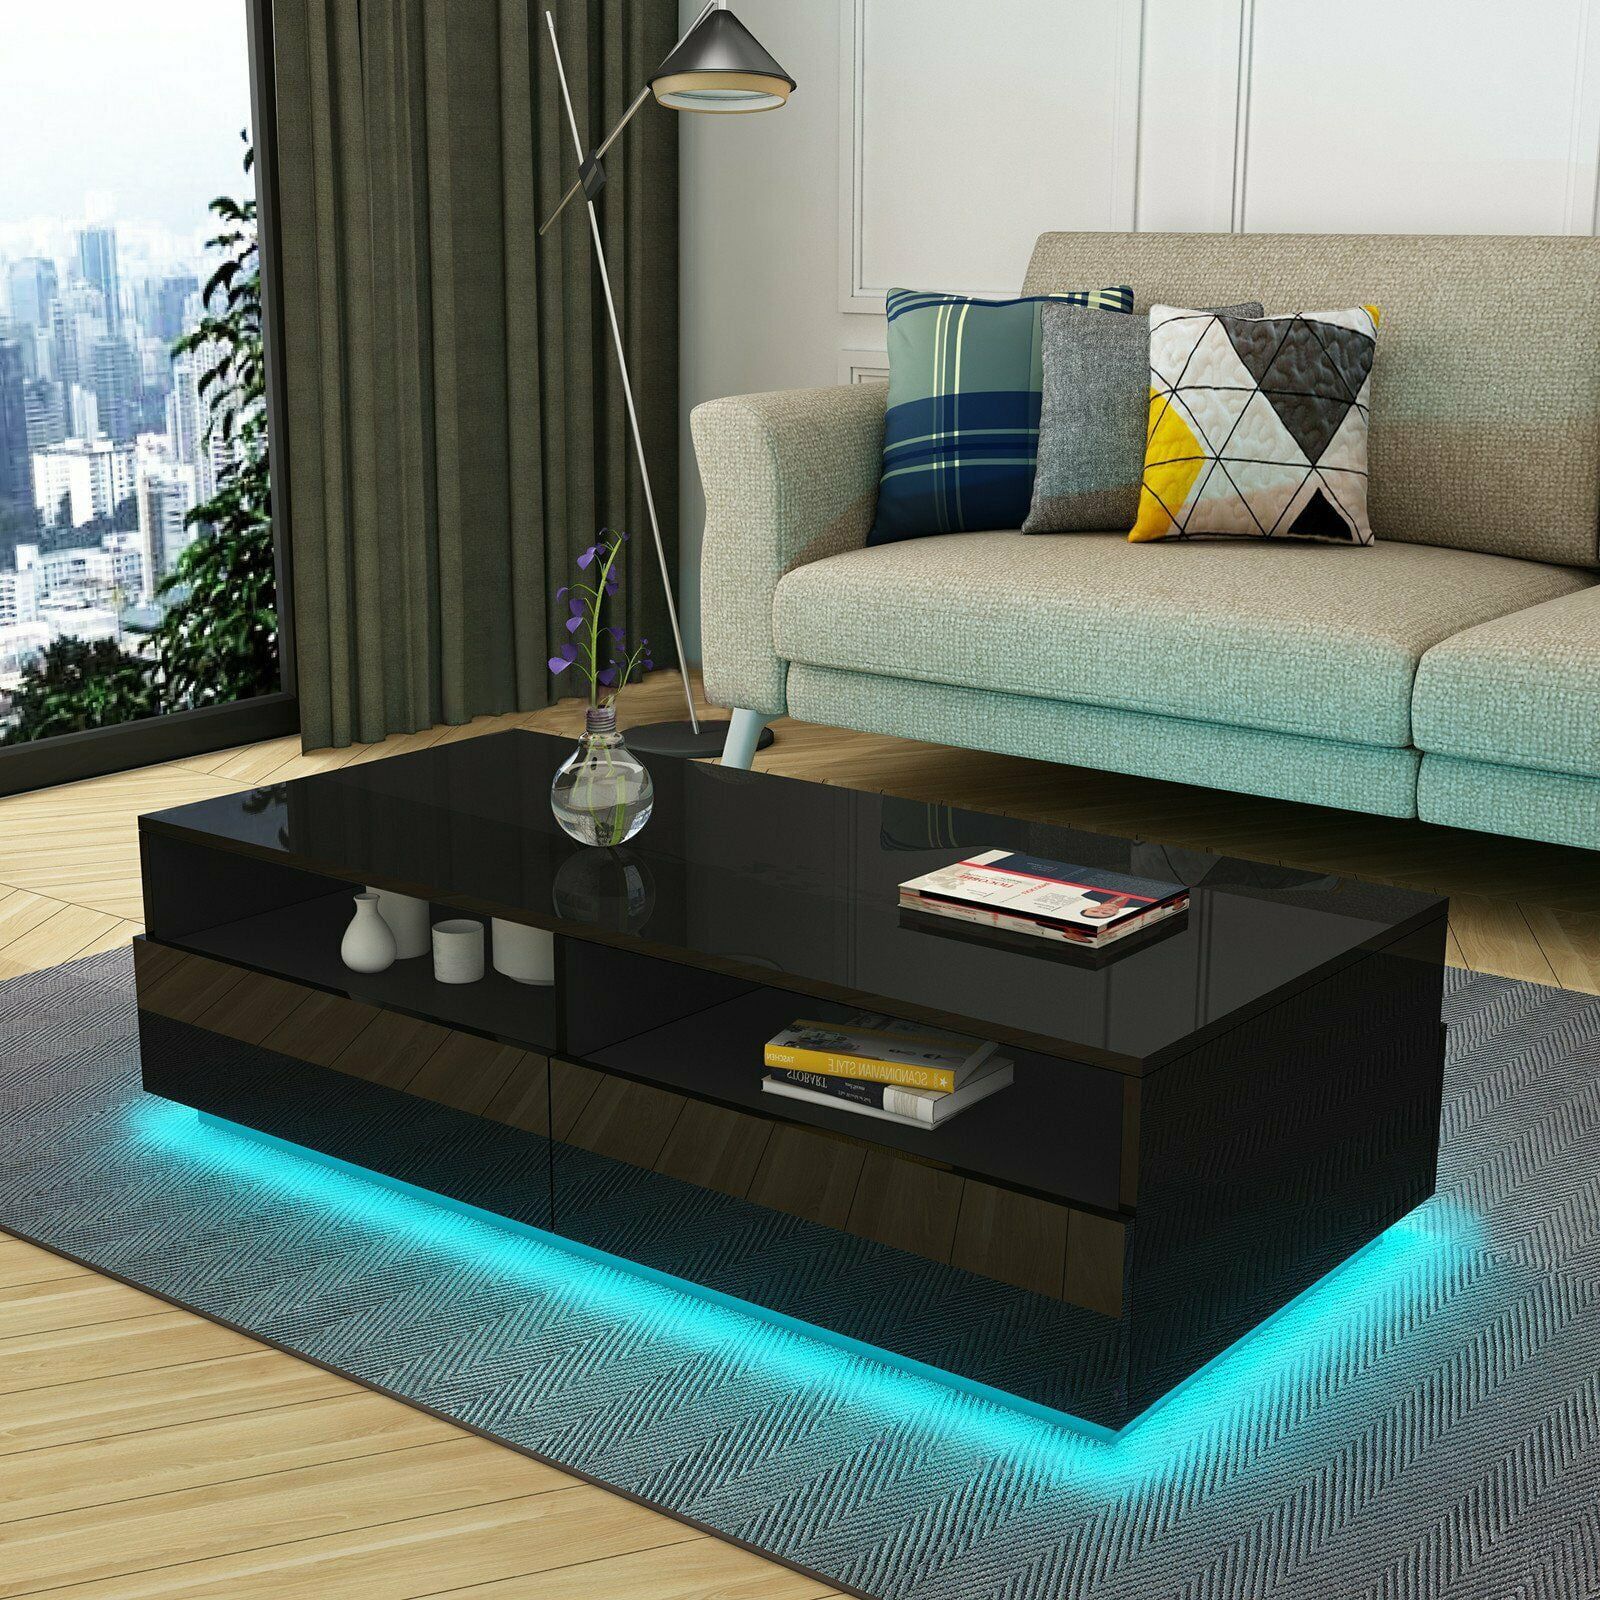 Led Rectangular Coffee Table Tea Modern Living Room Furniture Black Throughout Coffee Tables With Led Lights (View 10 of 20)